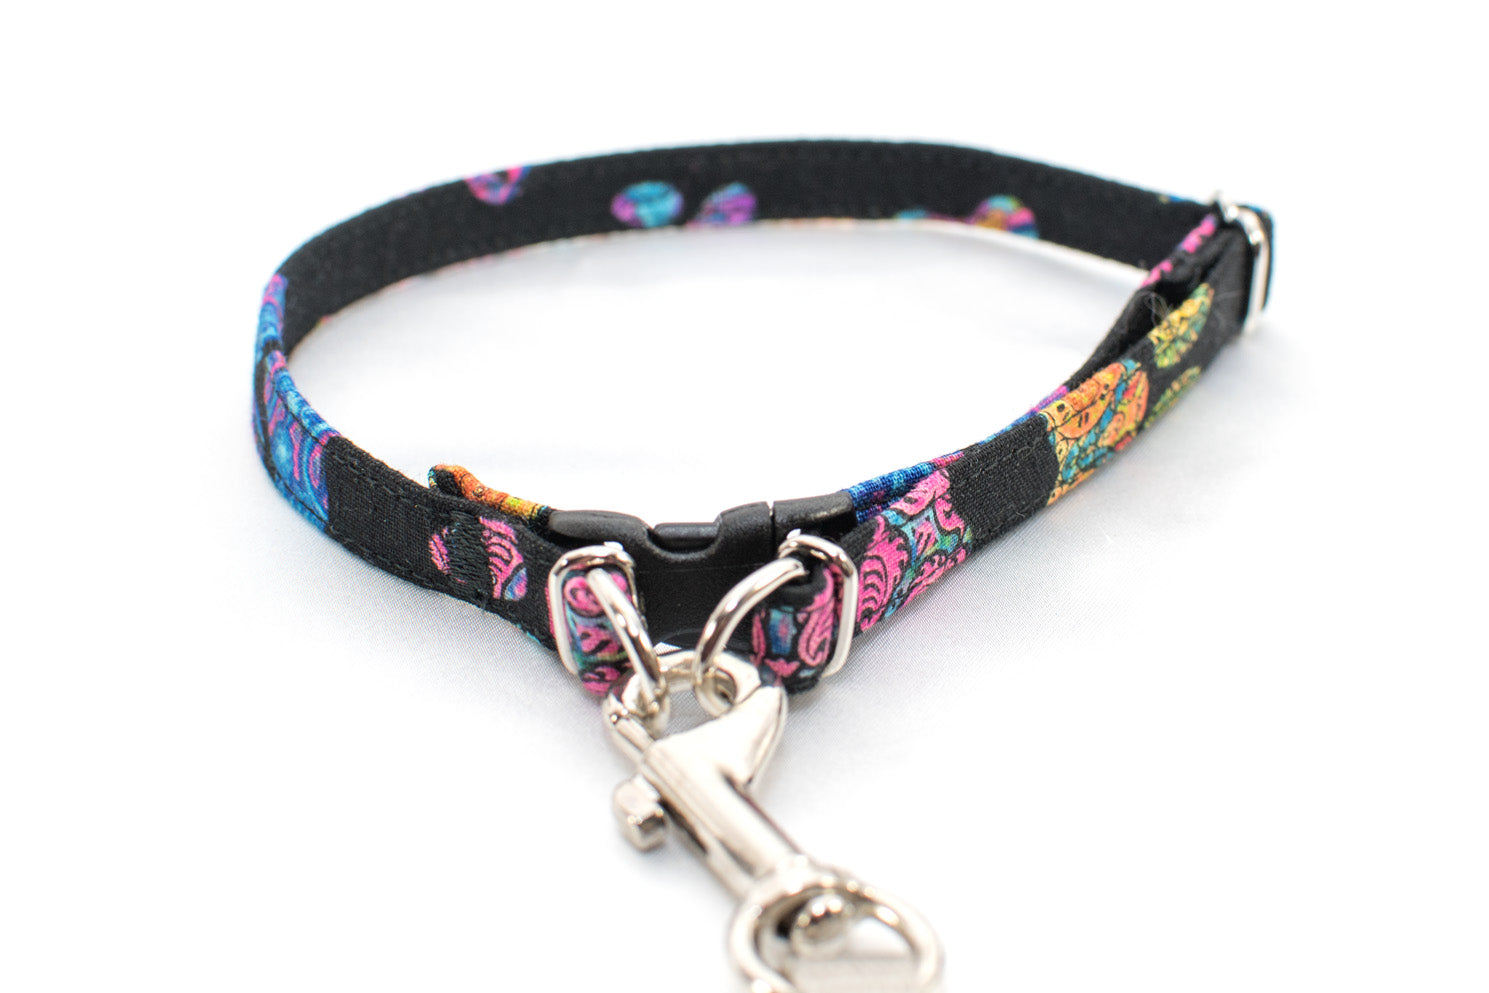 3/8" Choose-a-Fabric BreakAway Dog Collar - for small dogs - Fox Valley Dog Collars